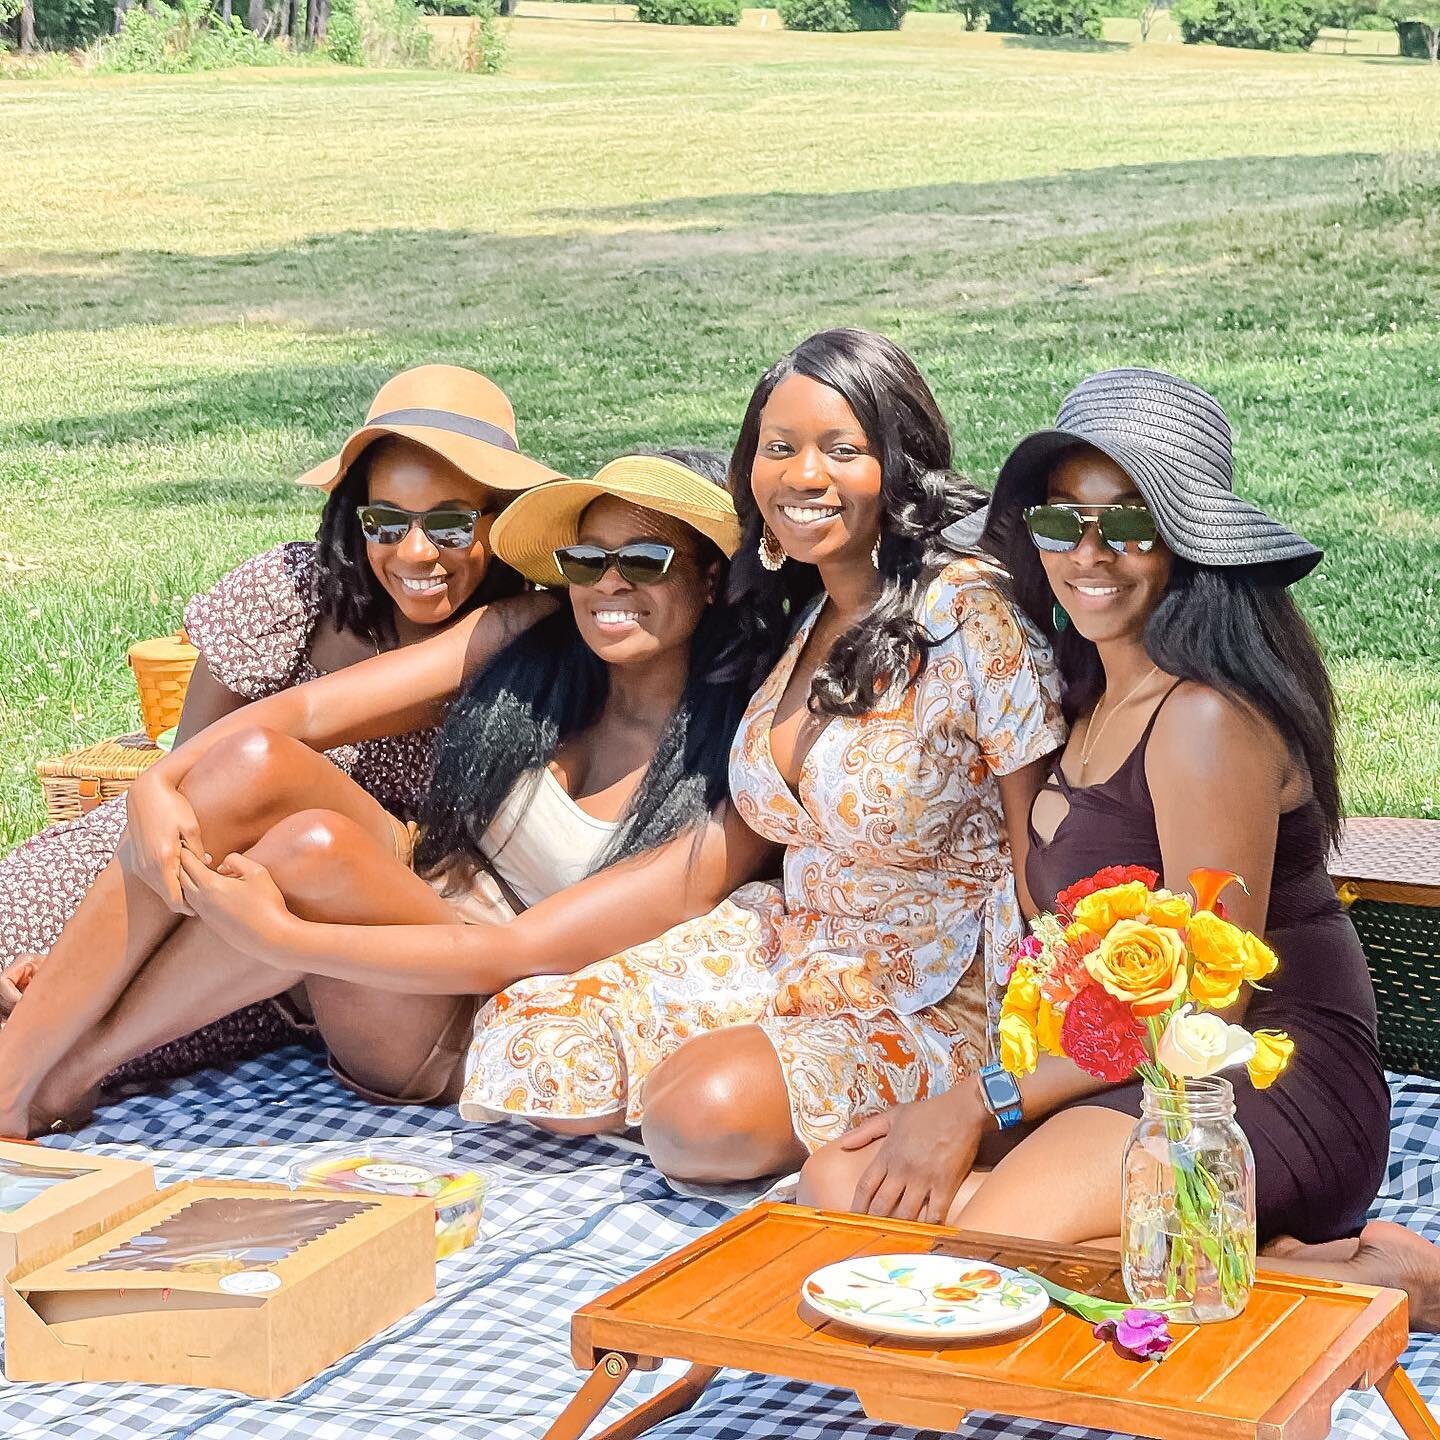 Grab the girls &amp; treat yourself to a picnic! We have openings for both a brunch &amp; afternoon picnic this Sunday. 

Message us or visit our website to book 💚

#girlsday #brunchraleigh #raleighpicnic #raleighpicnics #raleighevents #raleigh #ral